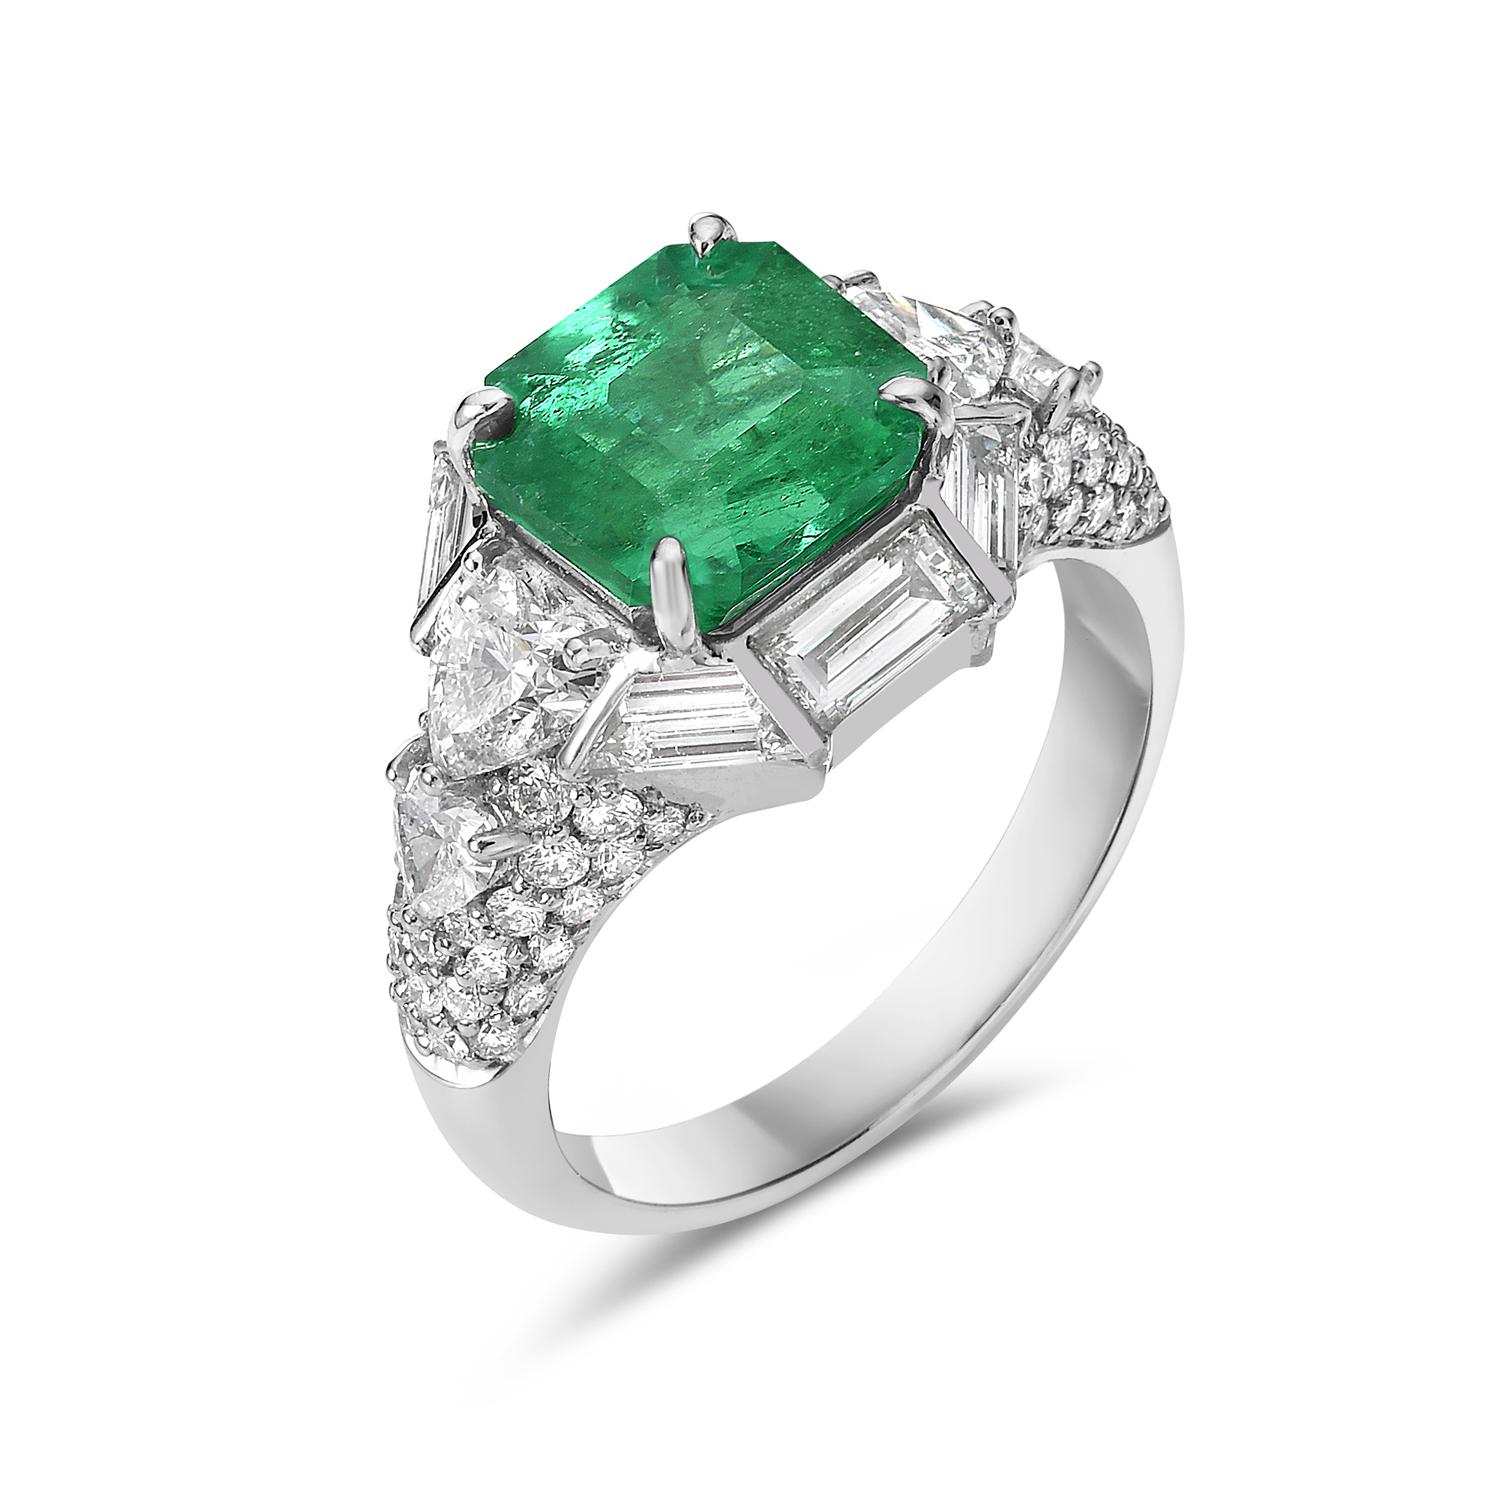 Contemporary 3.23 ct Center Stone Emerald Cocktail Ring With Diamonds Made In 18k White Gold For Sale